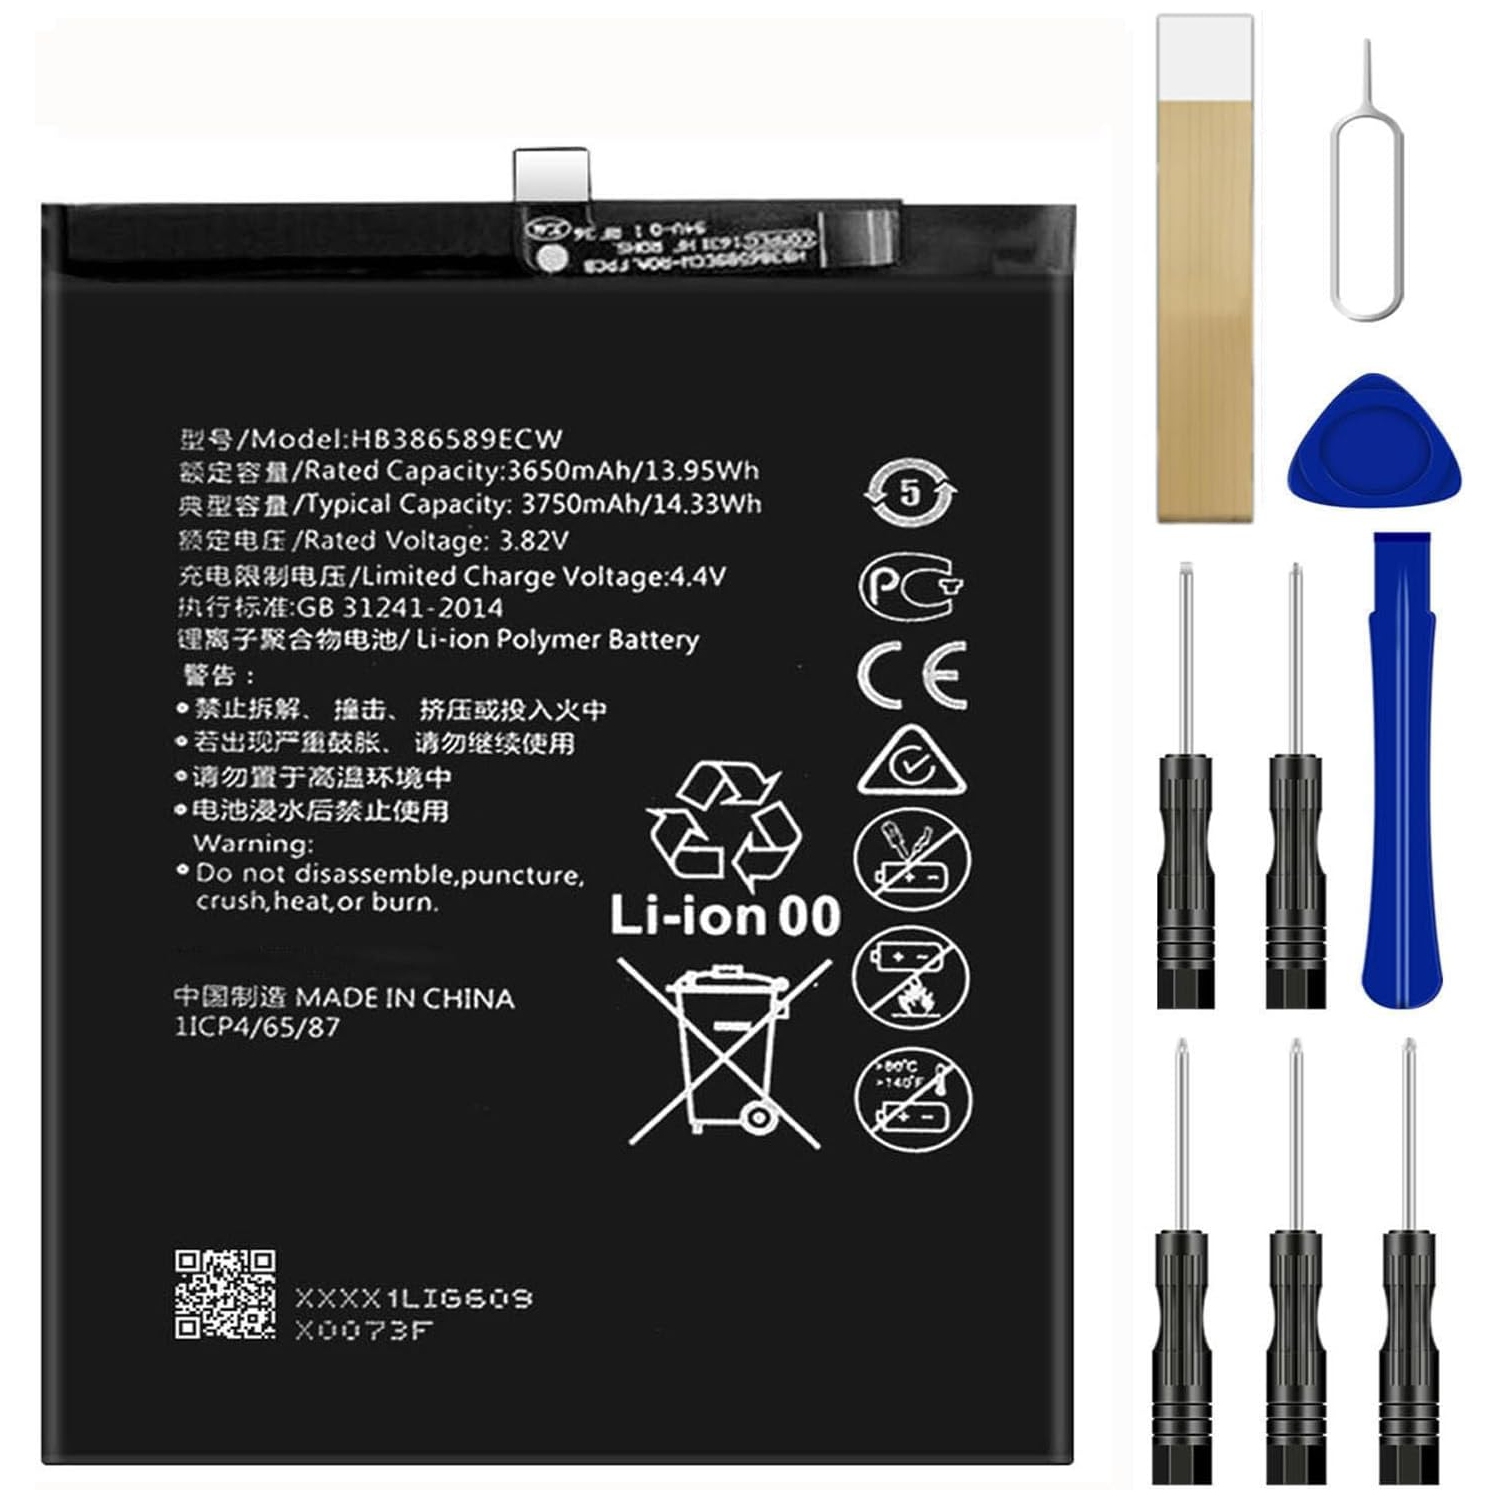 (CABLESHARK)Replacement Battery for Huawei Ascend P10 Plus / Mate 20 Lite / Honor View 10 / Nova 3 HB386589ECW + TOOLS (FREE SHIPPING)